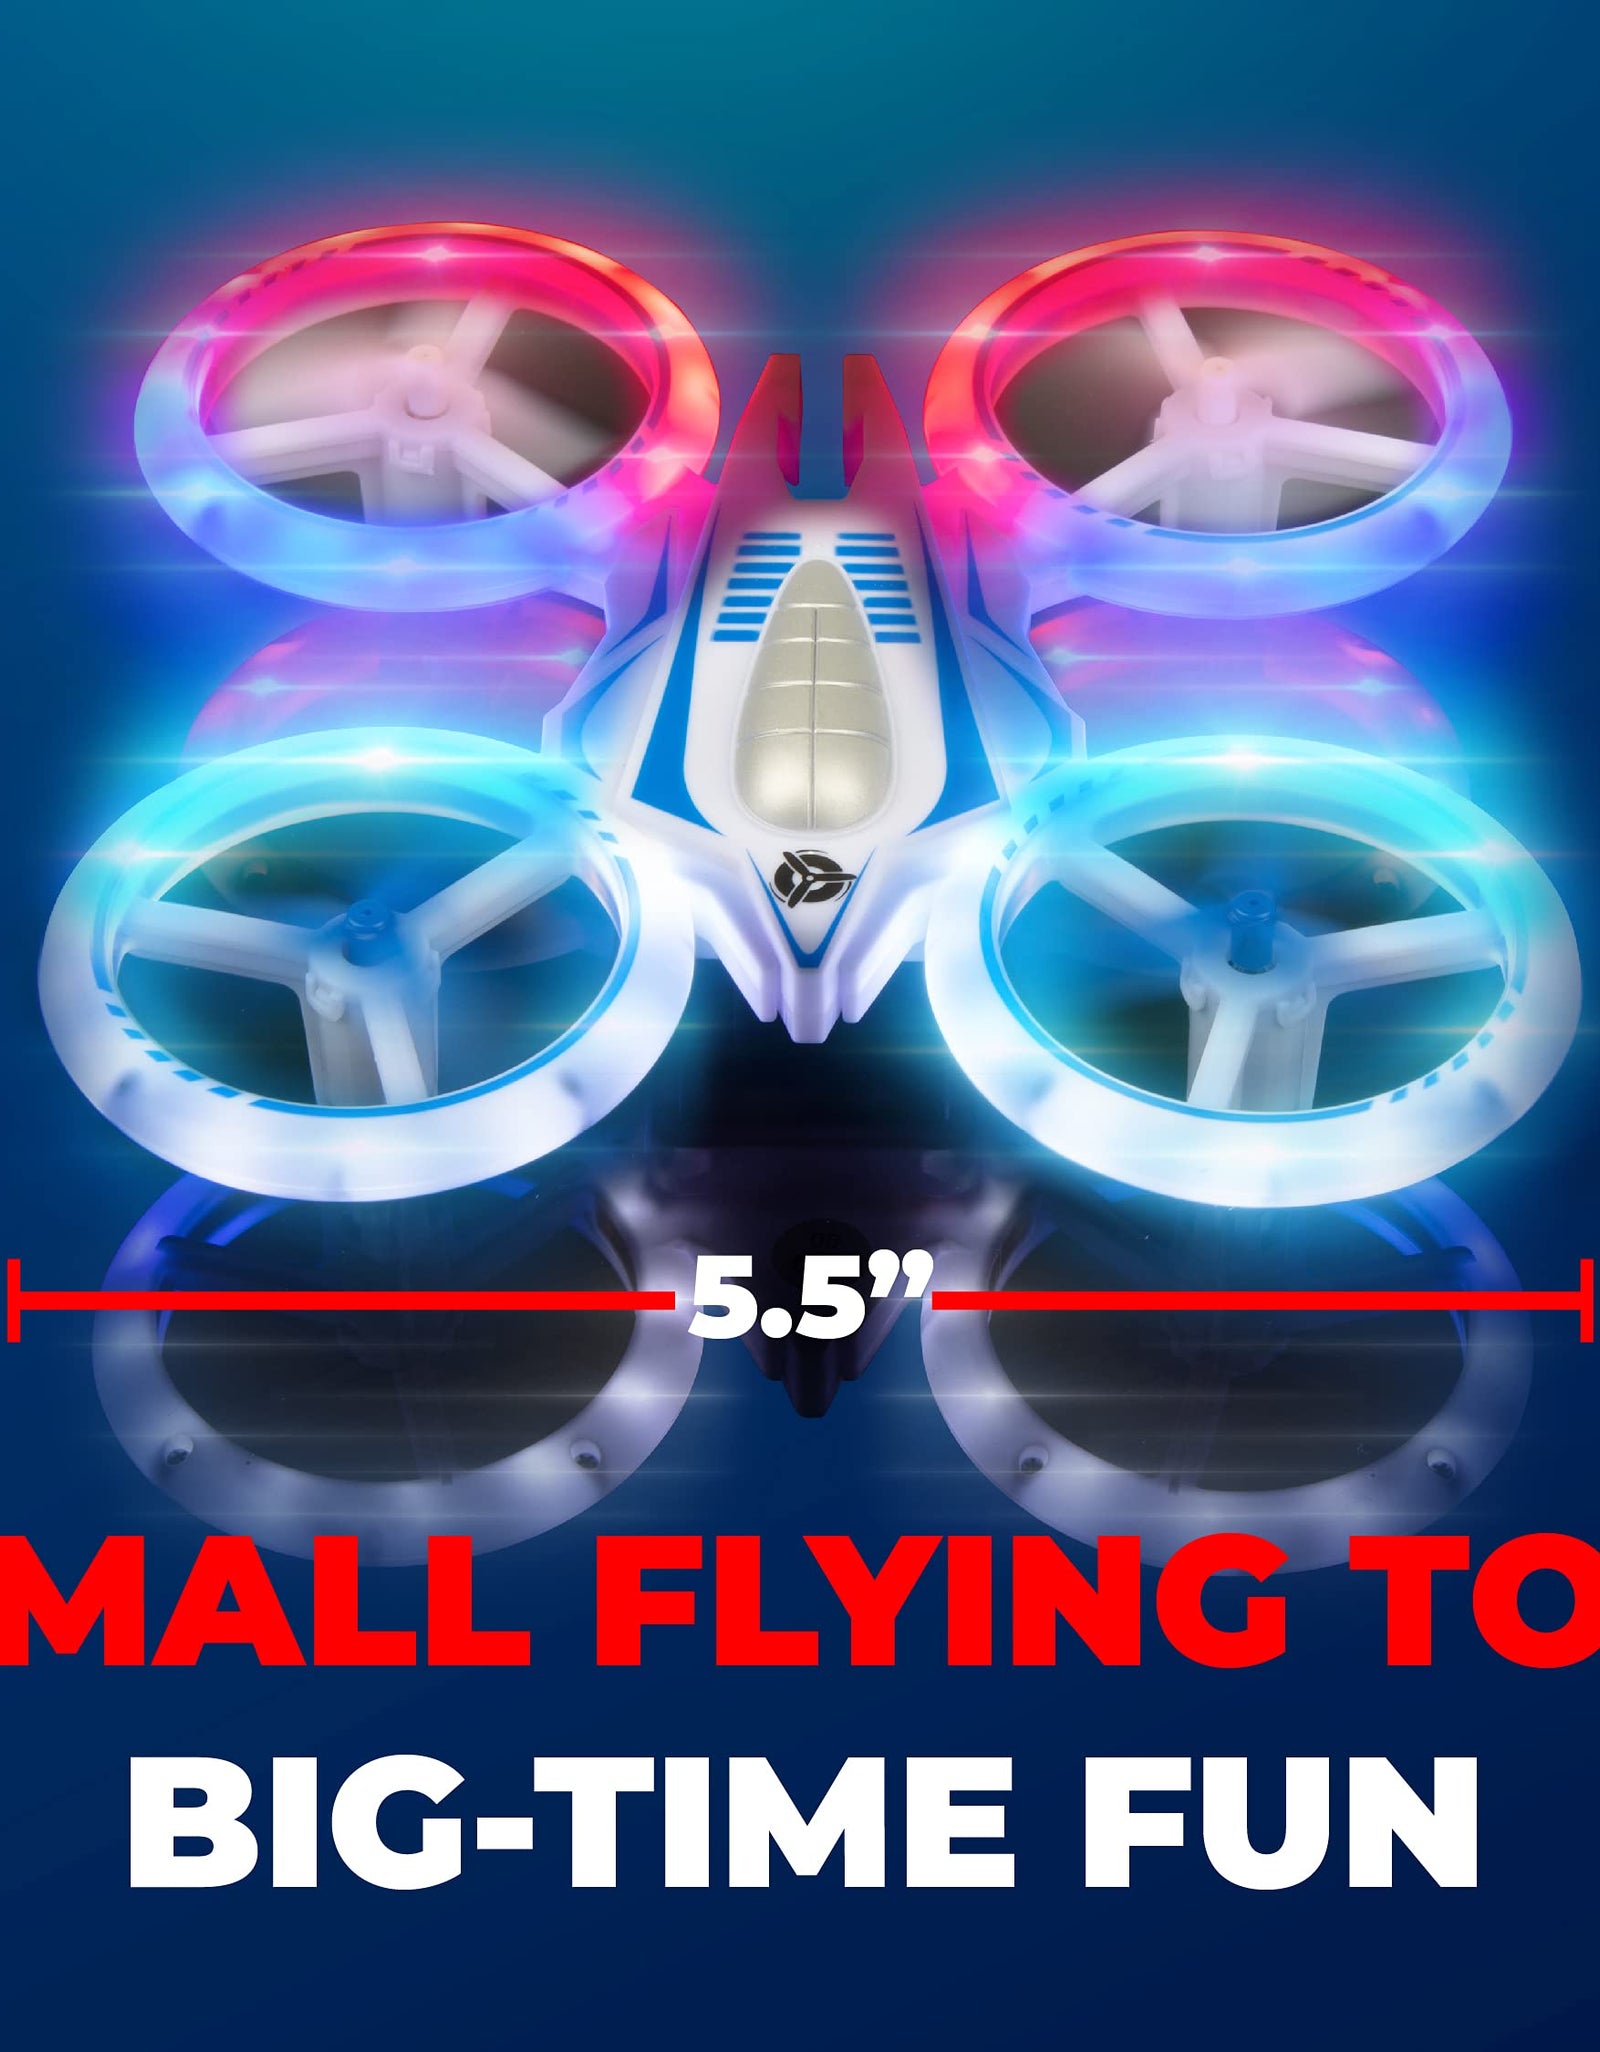 Force1 UFO 4000 Mini Drone for Kids - LED Remote Control Drone, Small RC Quadcopter for Beginners with LEDs, 4-Channel Remote Control, 2 Speeds, and 2 Drone Batteries